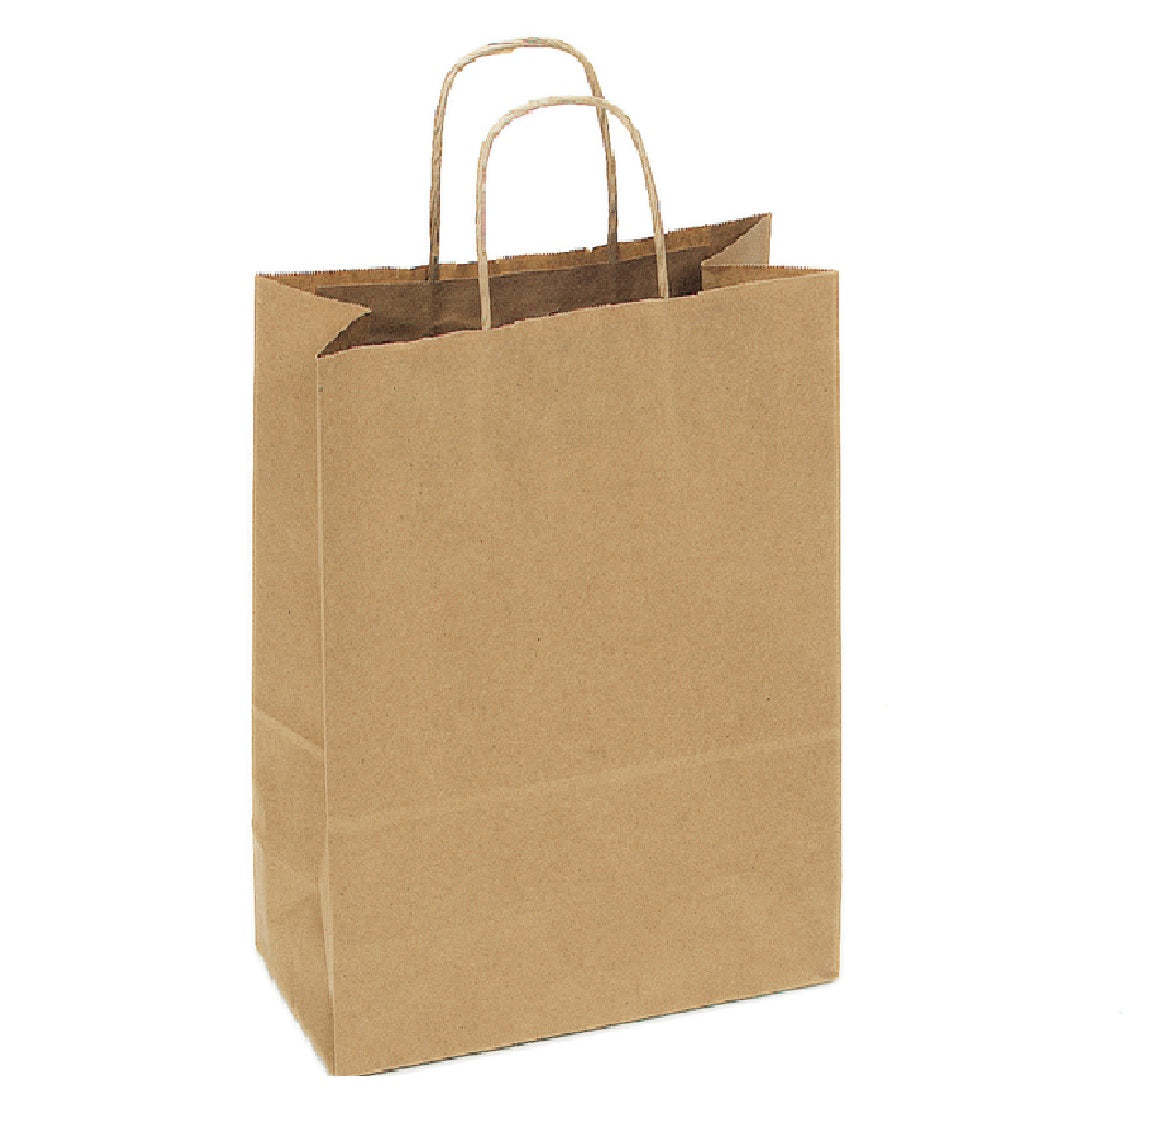 ProAmpac TBK-1013 Shopping Bag With Handles, Paper